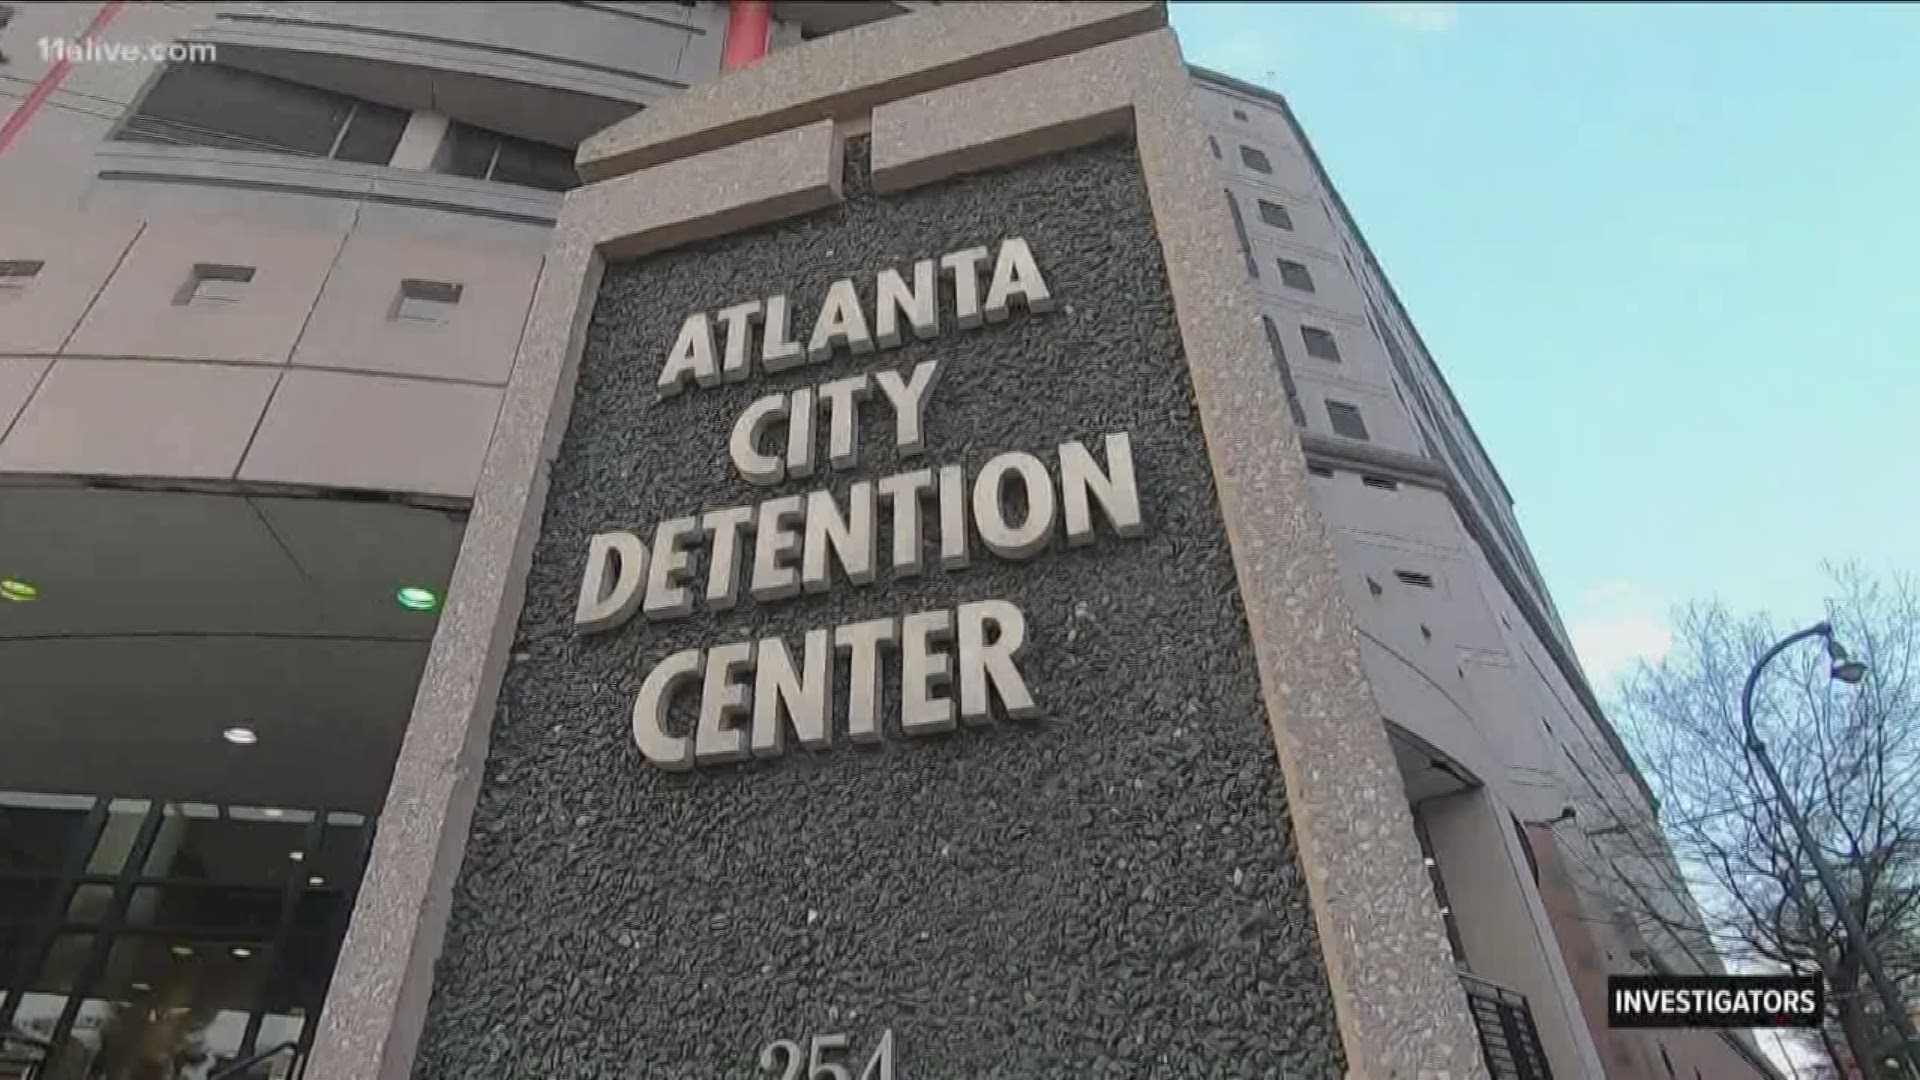 The city of Atlanta is trusting potential shoplifters, pot users and illegal drivers to return to court, requiring nothing but their signature to get out of jail.